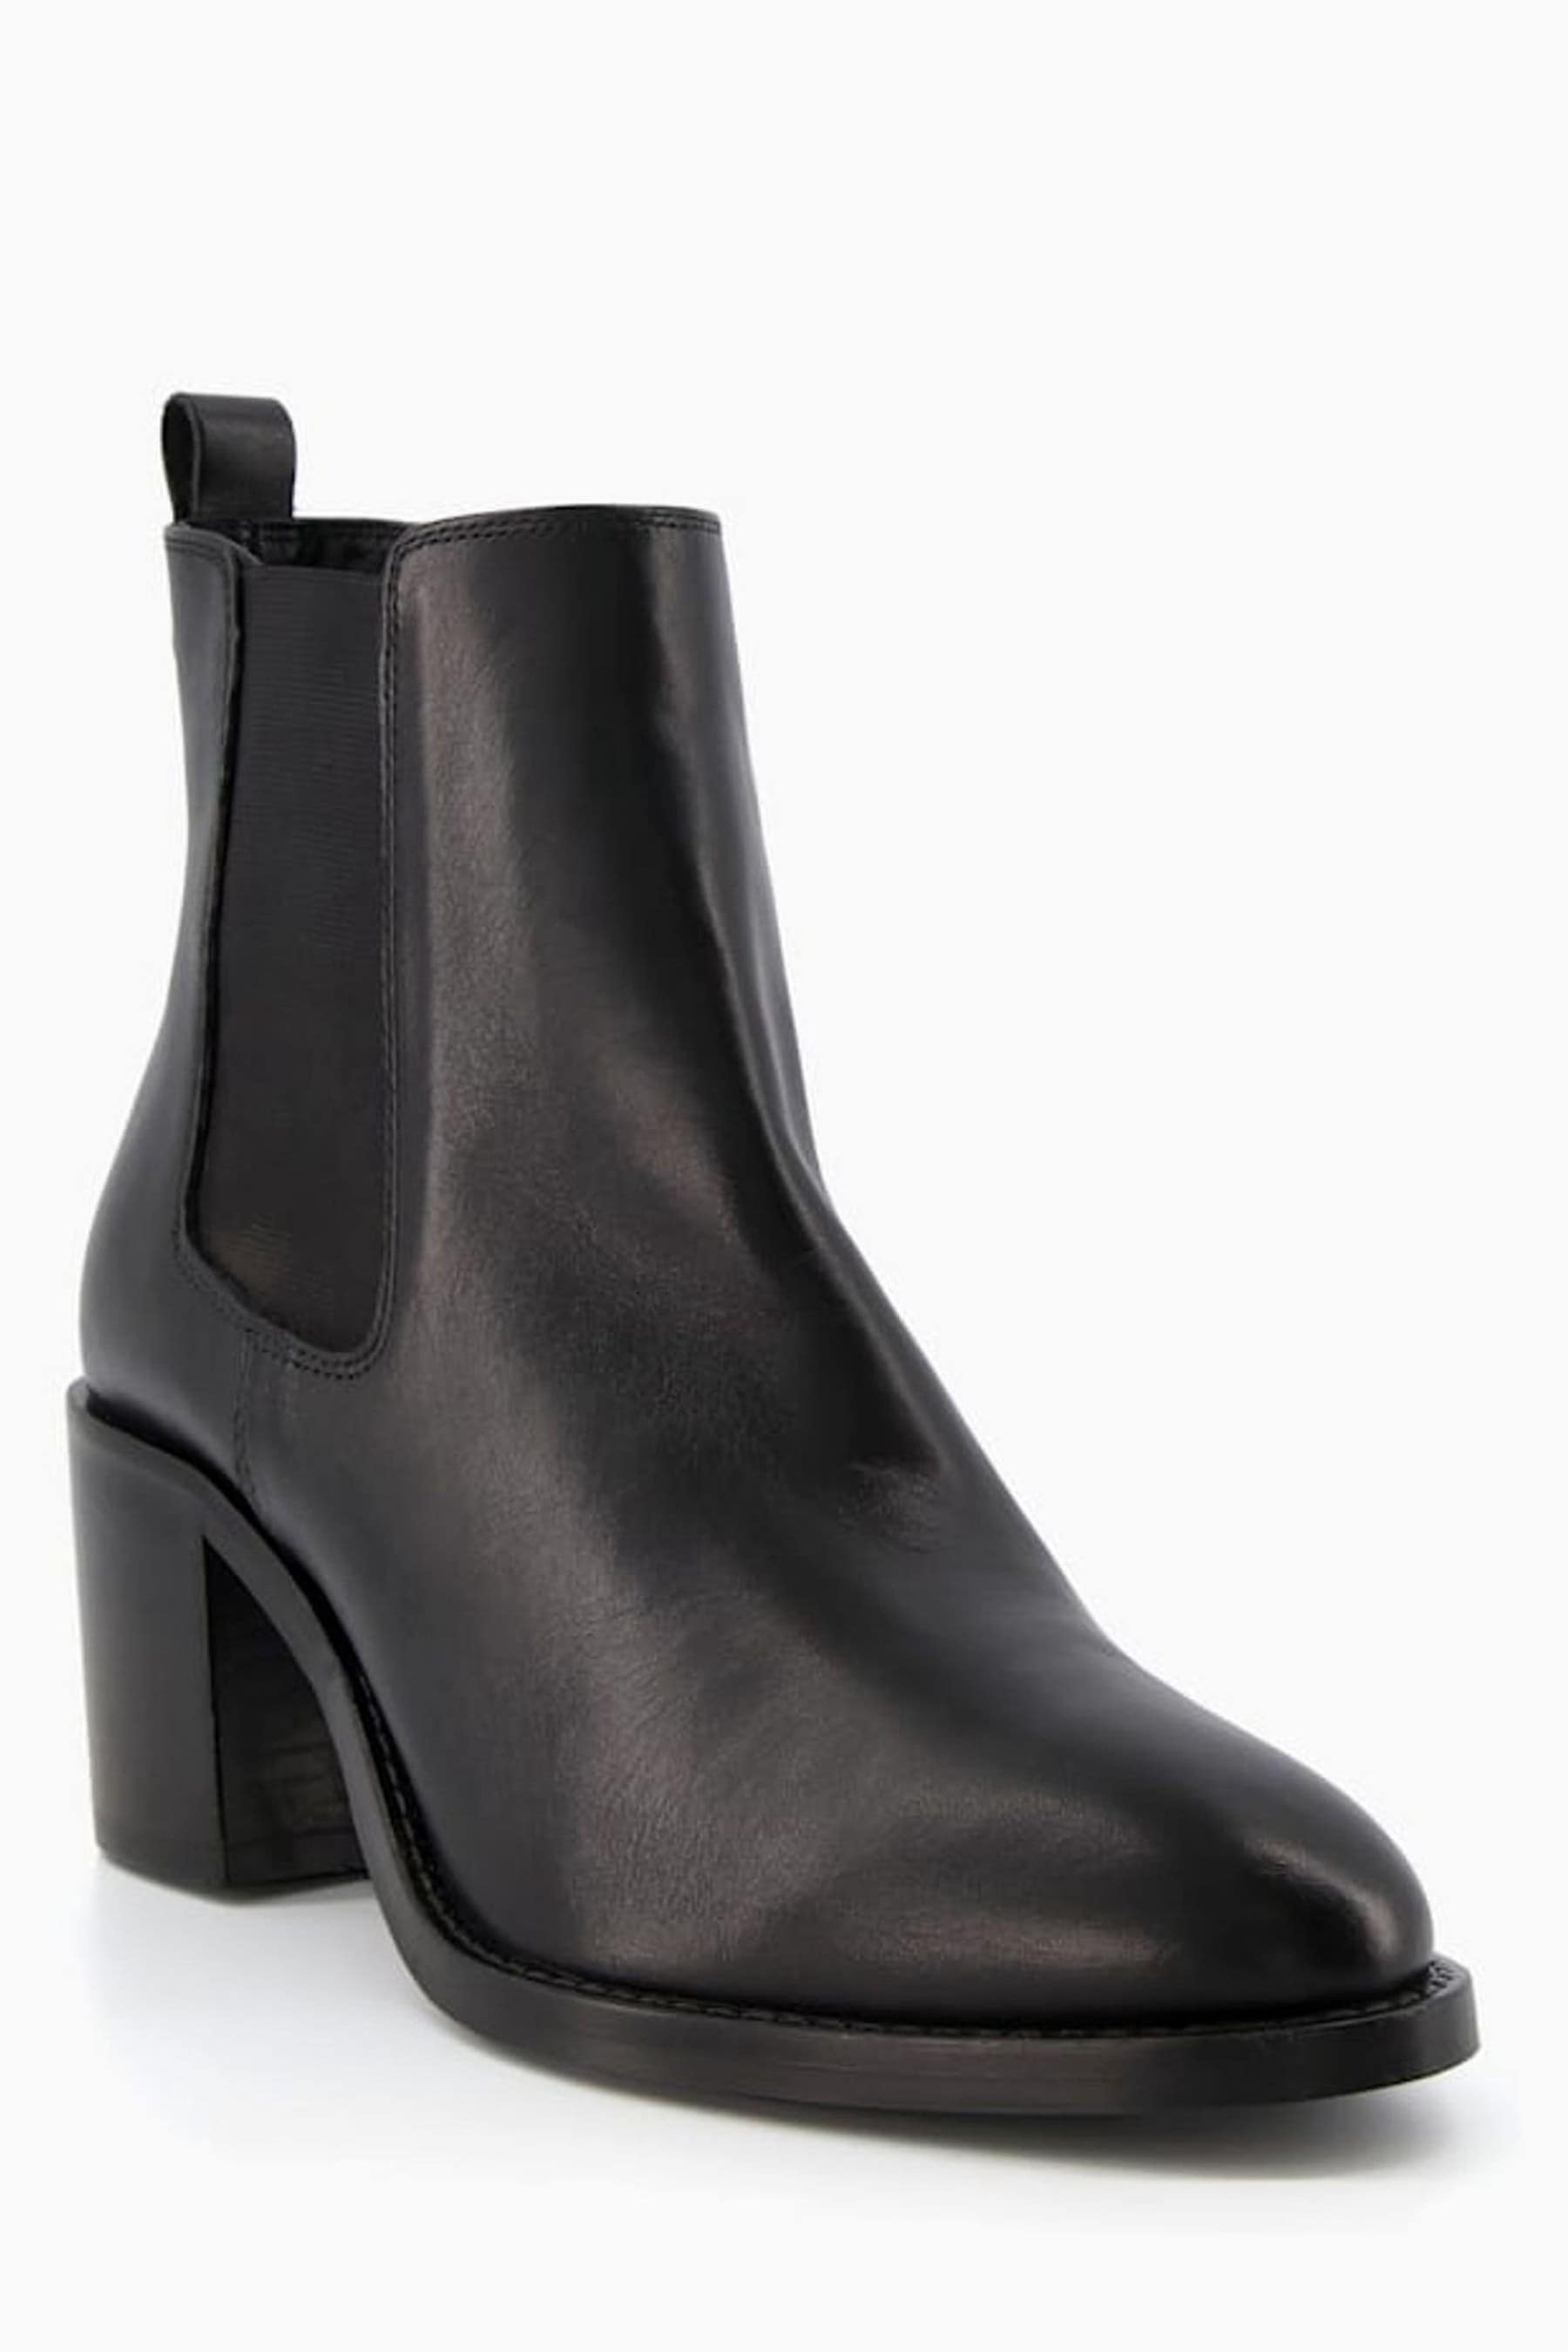 Buy Dune London Black Pembly Heeled Chelsea Boots from the Next UK ...